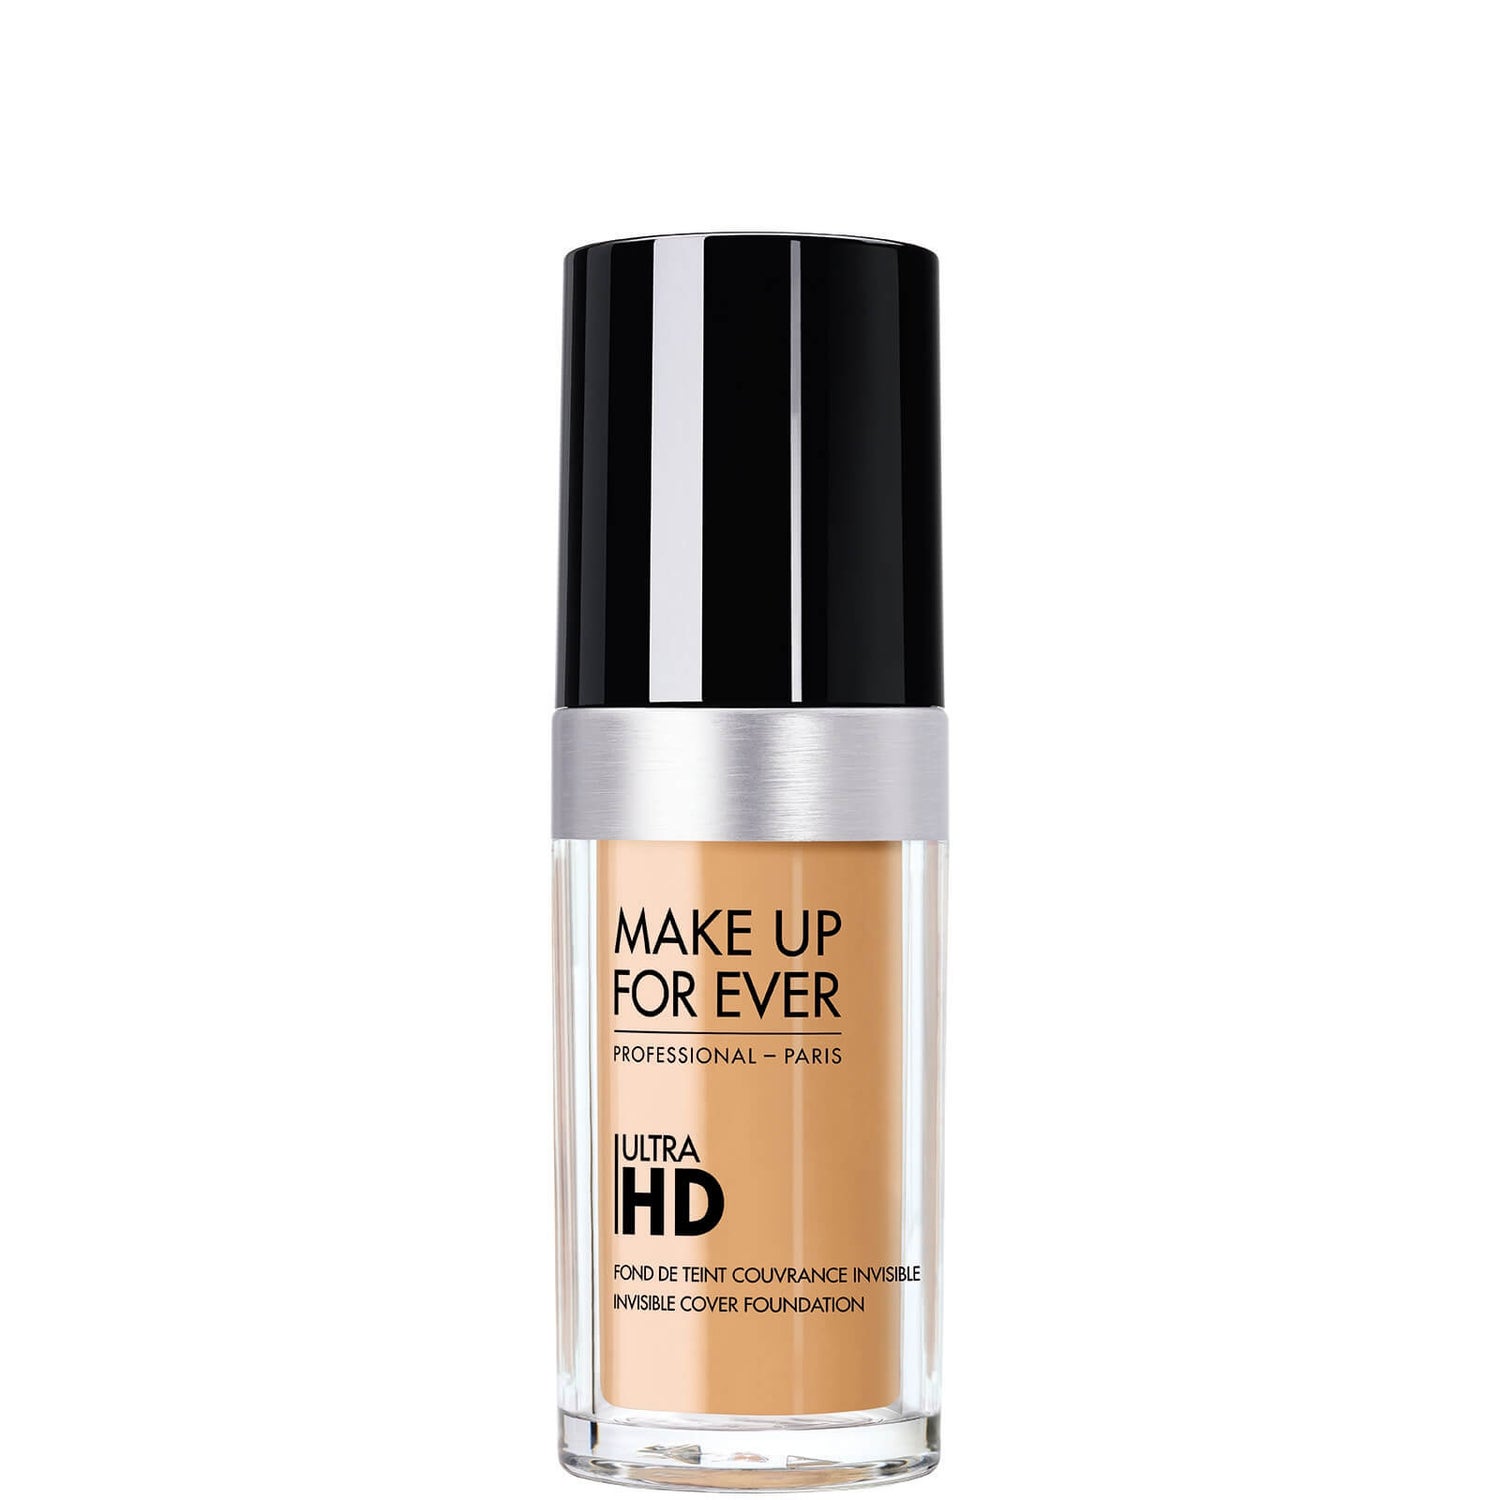 MAKE UP FOR EVER Hd Invisible Foundation (Various Shades) -